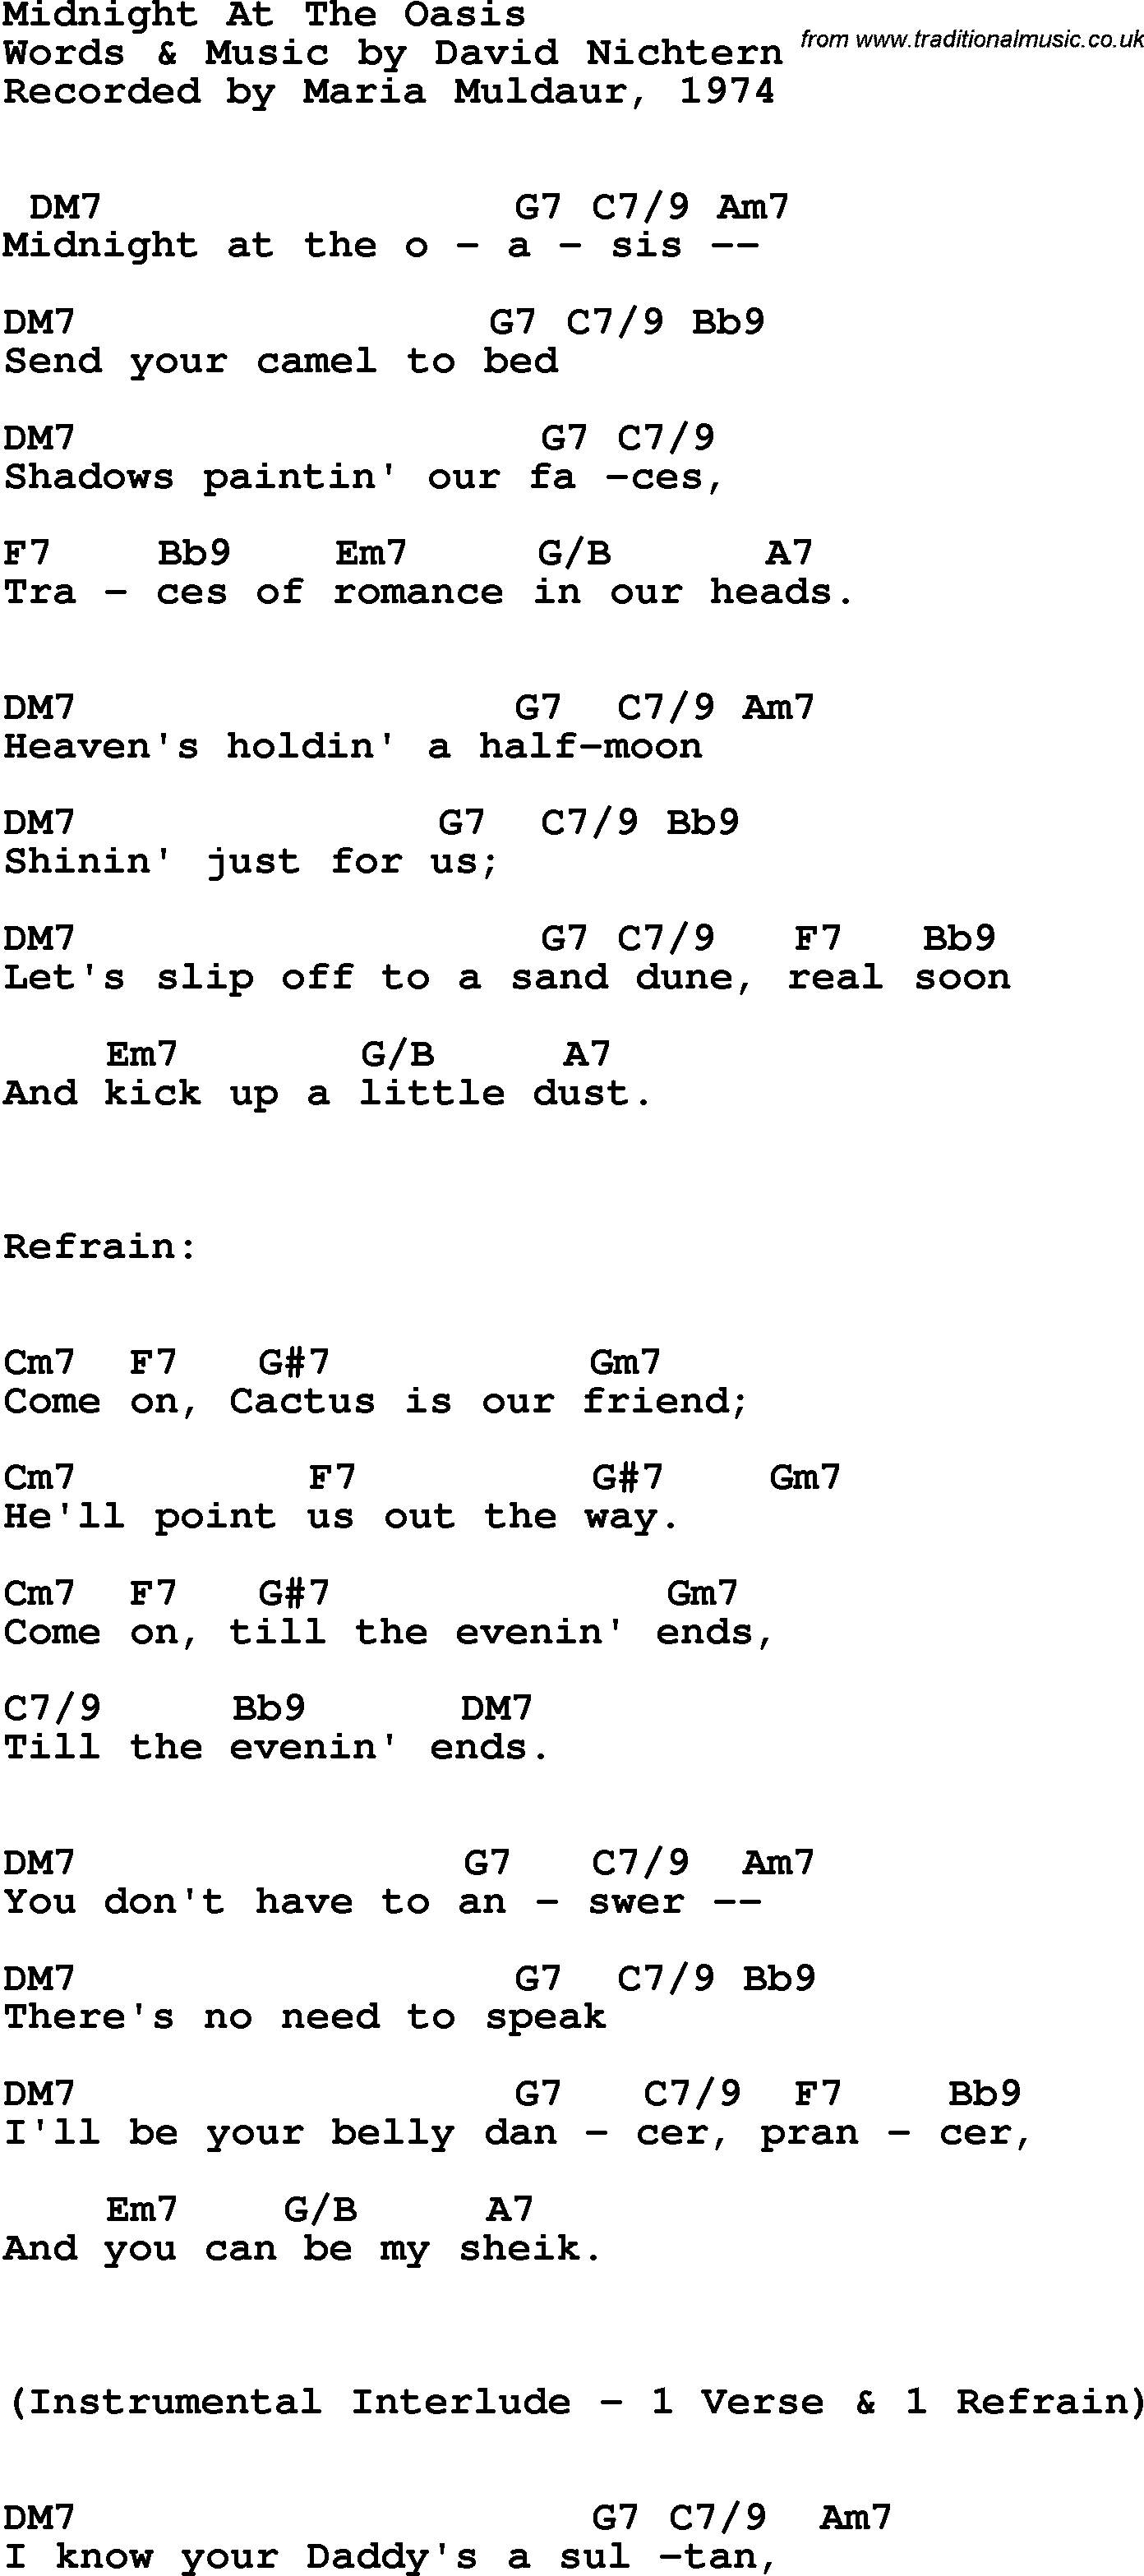 Song Lyrics with guitar chords for Midnight At The Oasis - Maria Muldaur, 1974